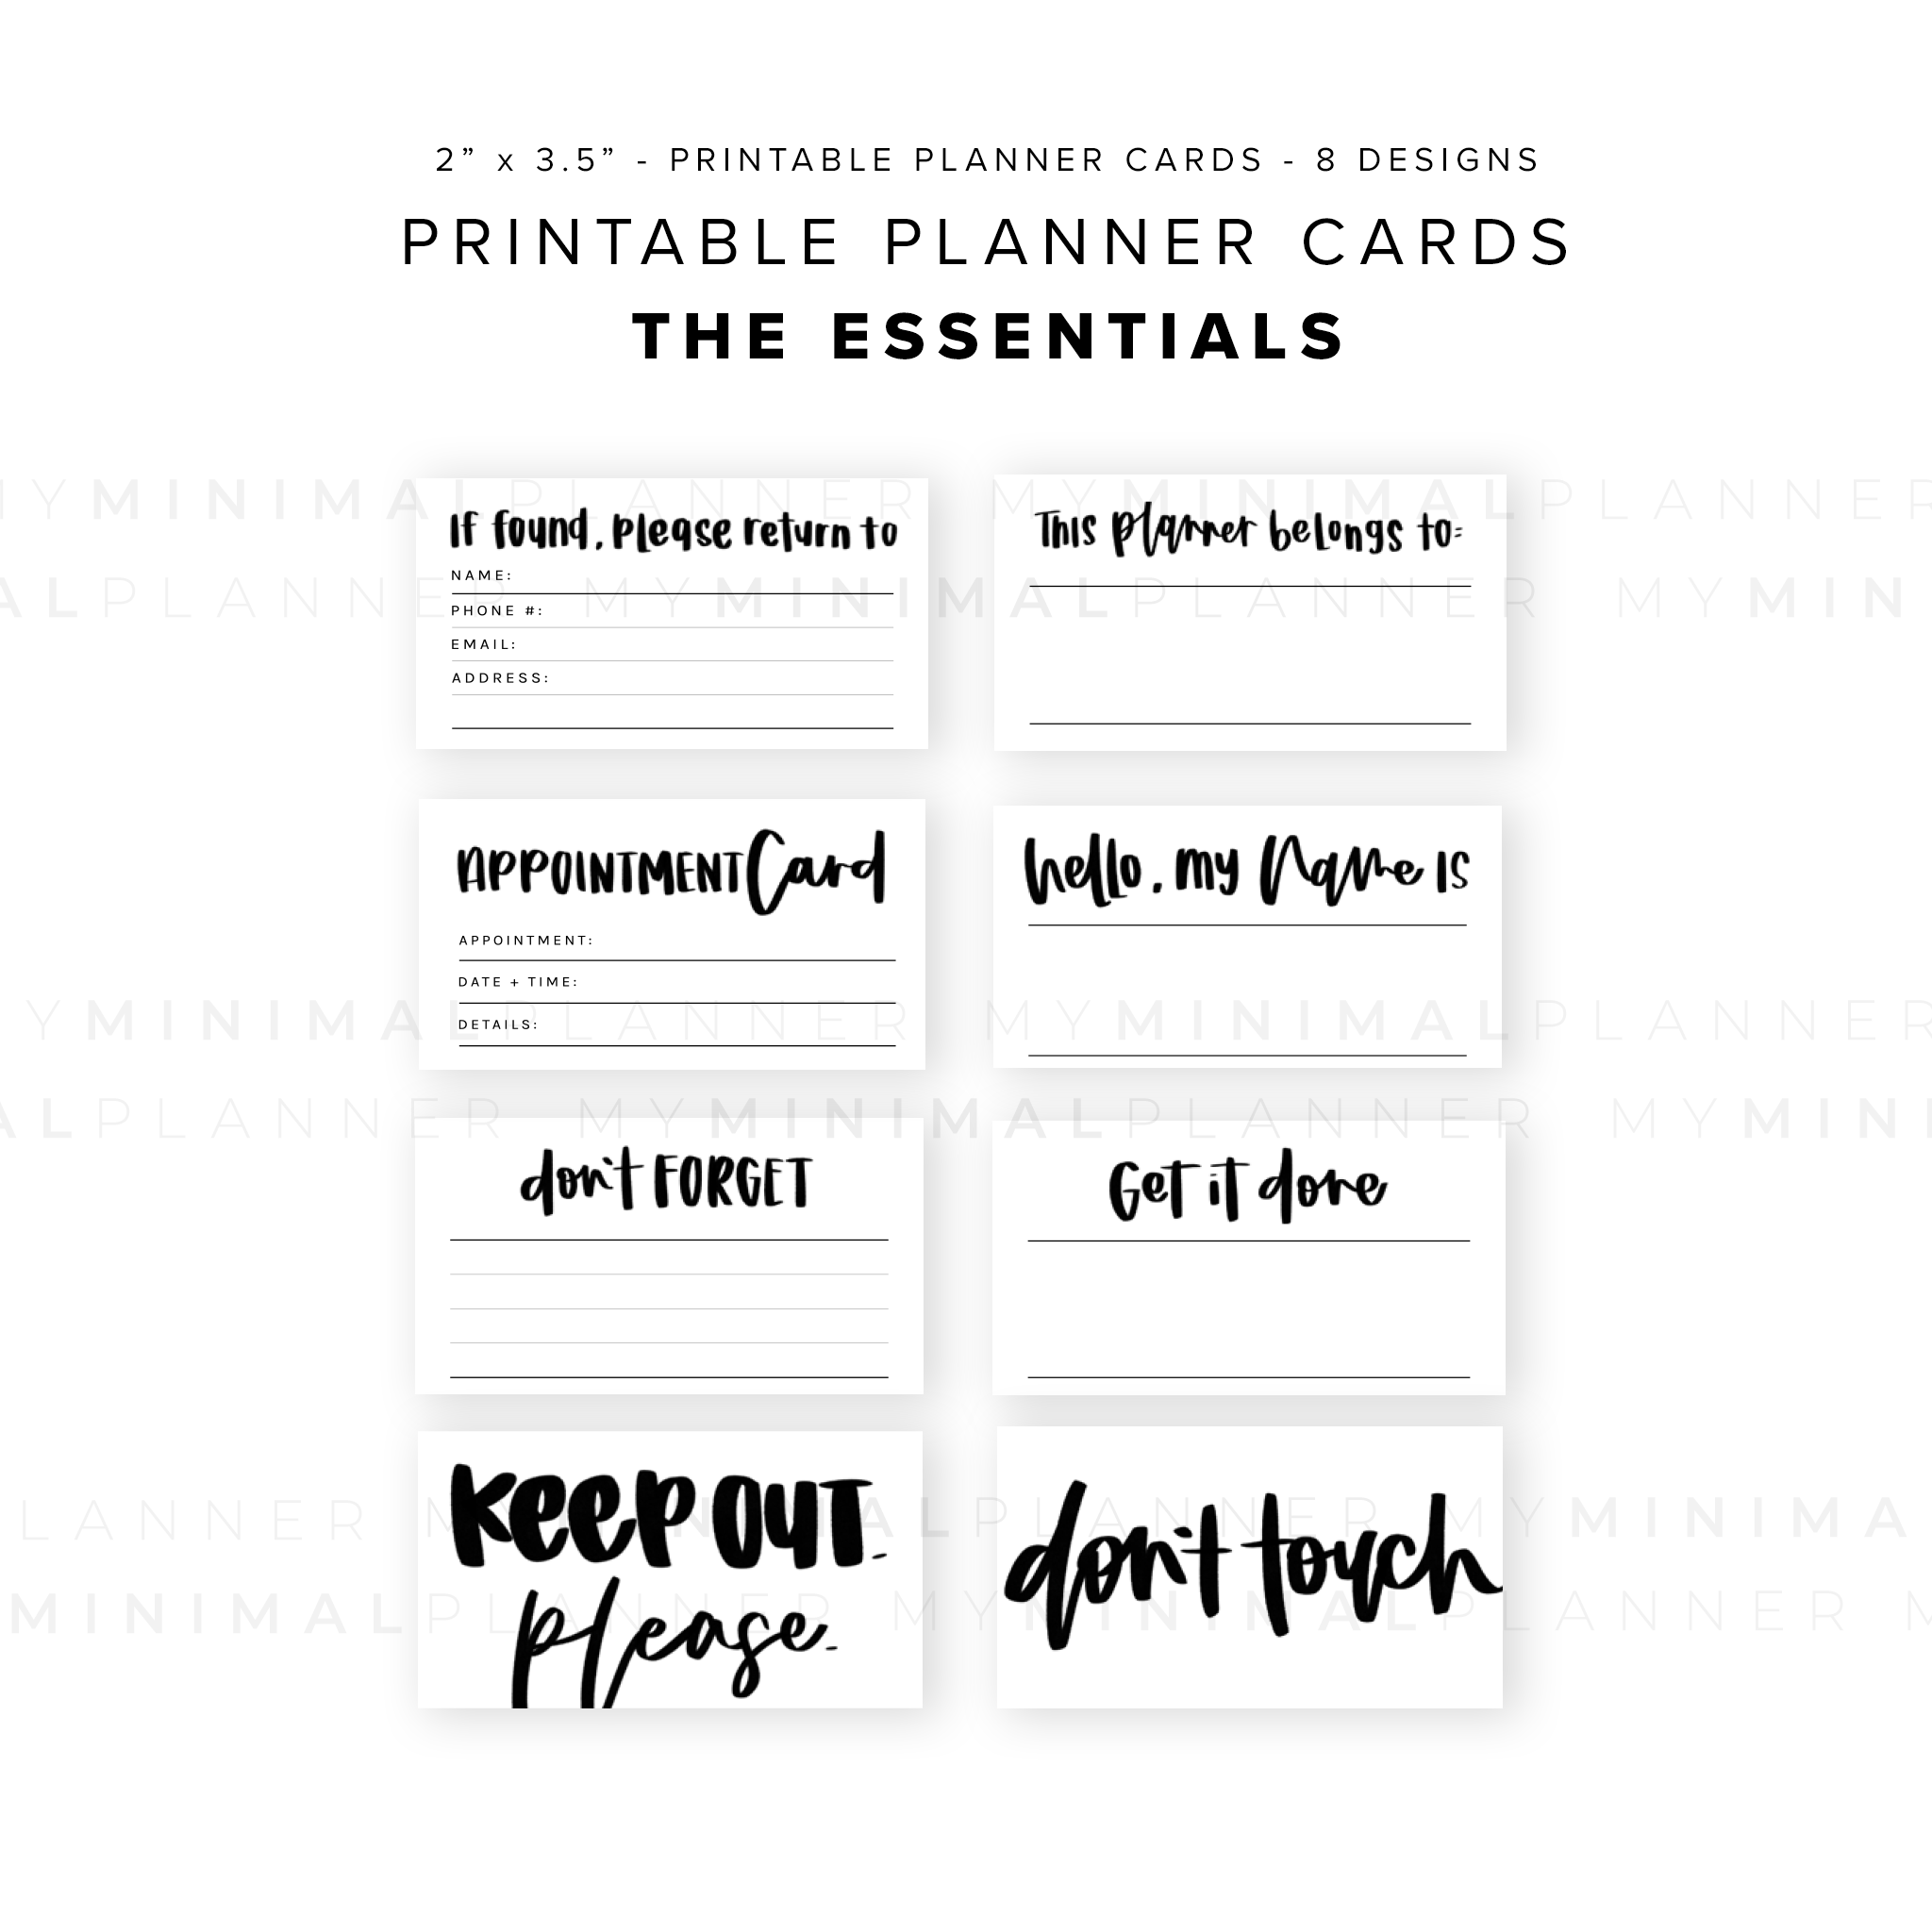 PPC09 - The Essentials - Printable Planner Cards